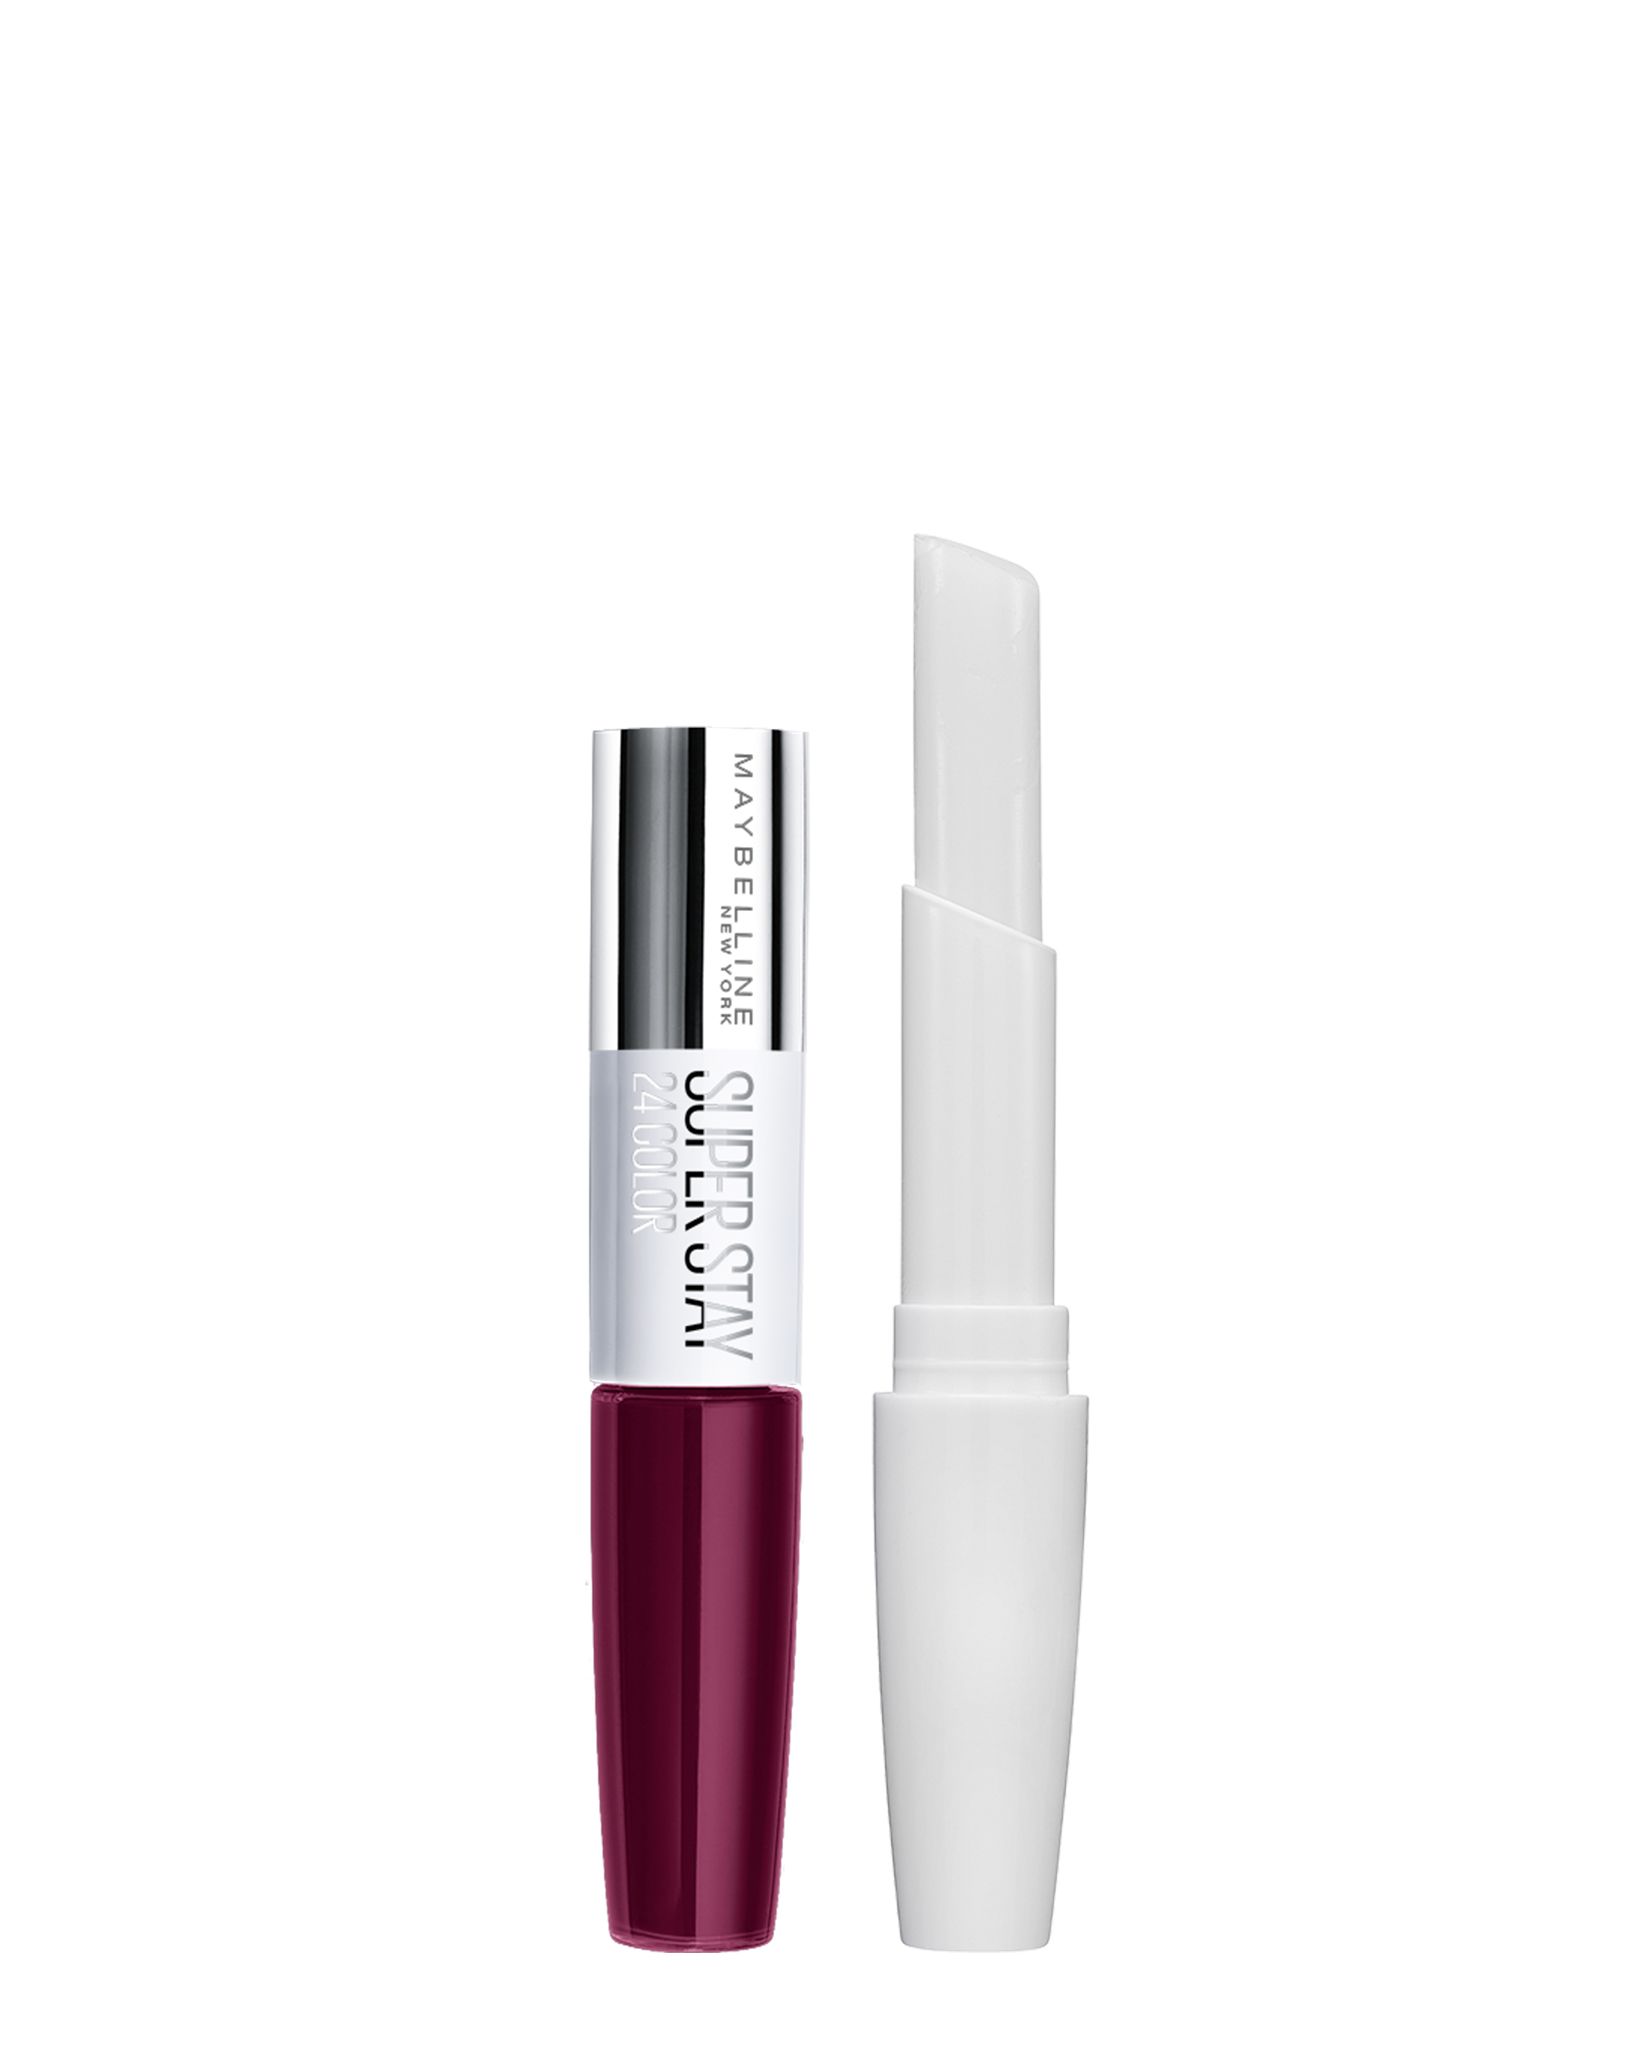 Labios Superstay 24H 250 MAYBELLINE, pack 1 unid.